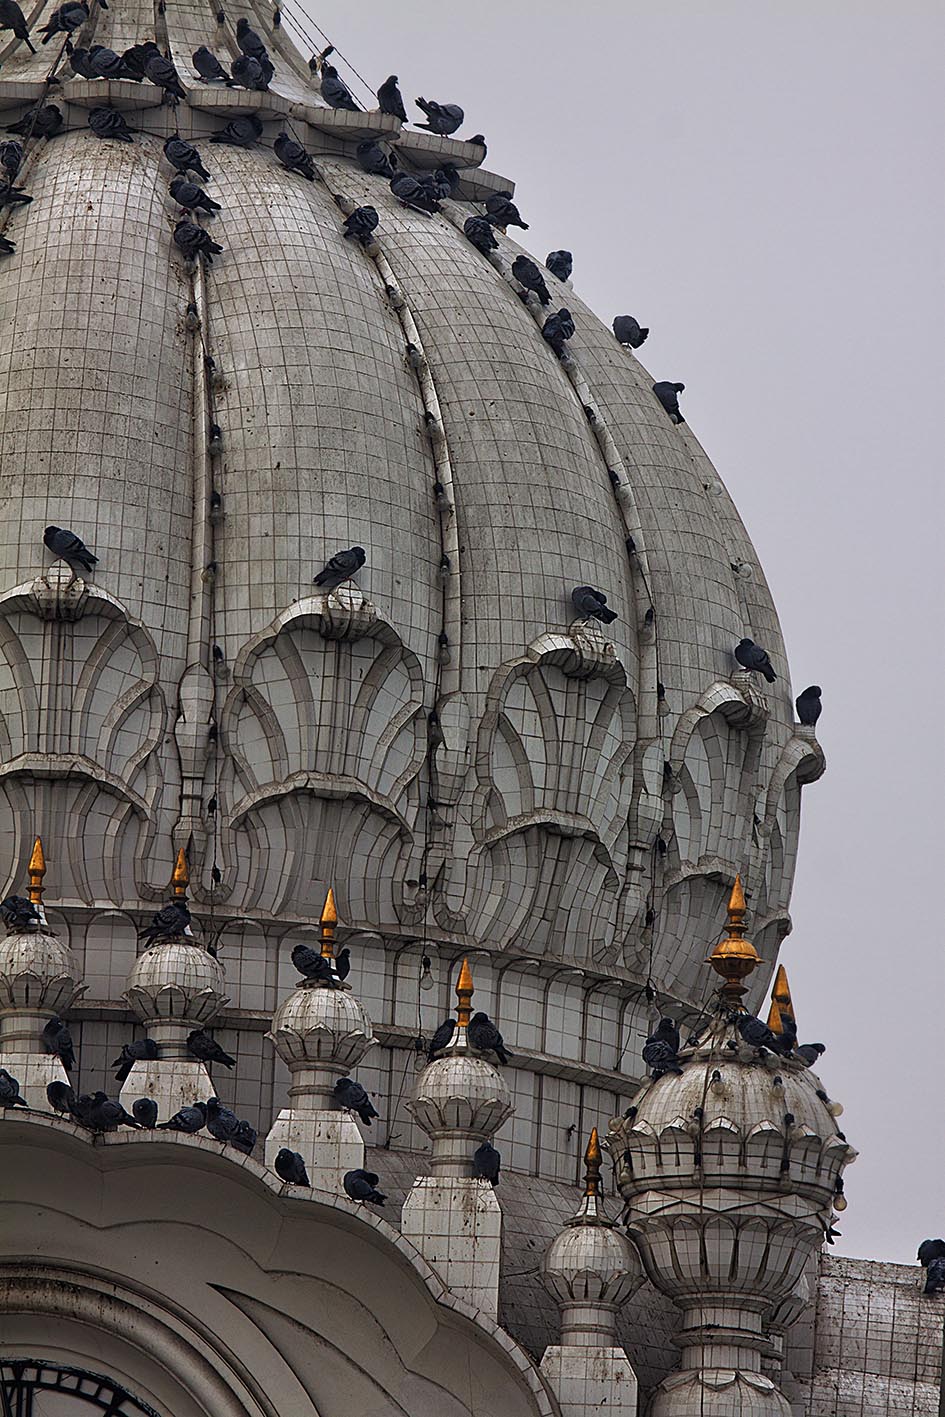 Domes of Golden Temple, Amritsar, India